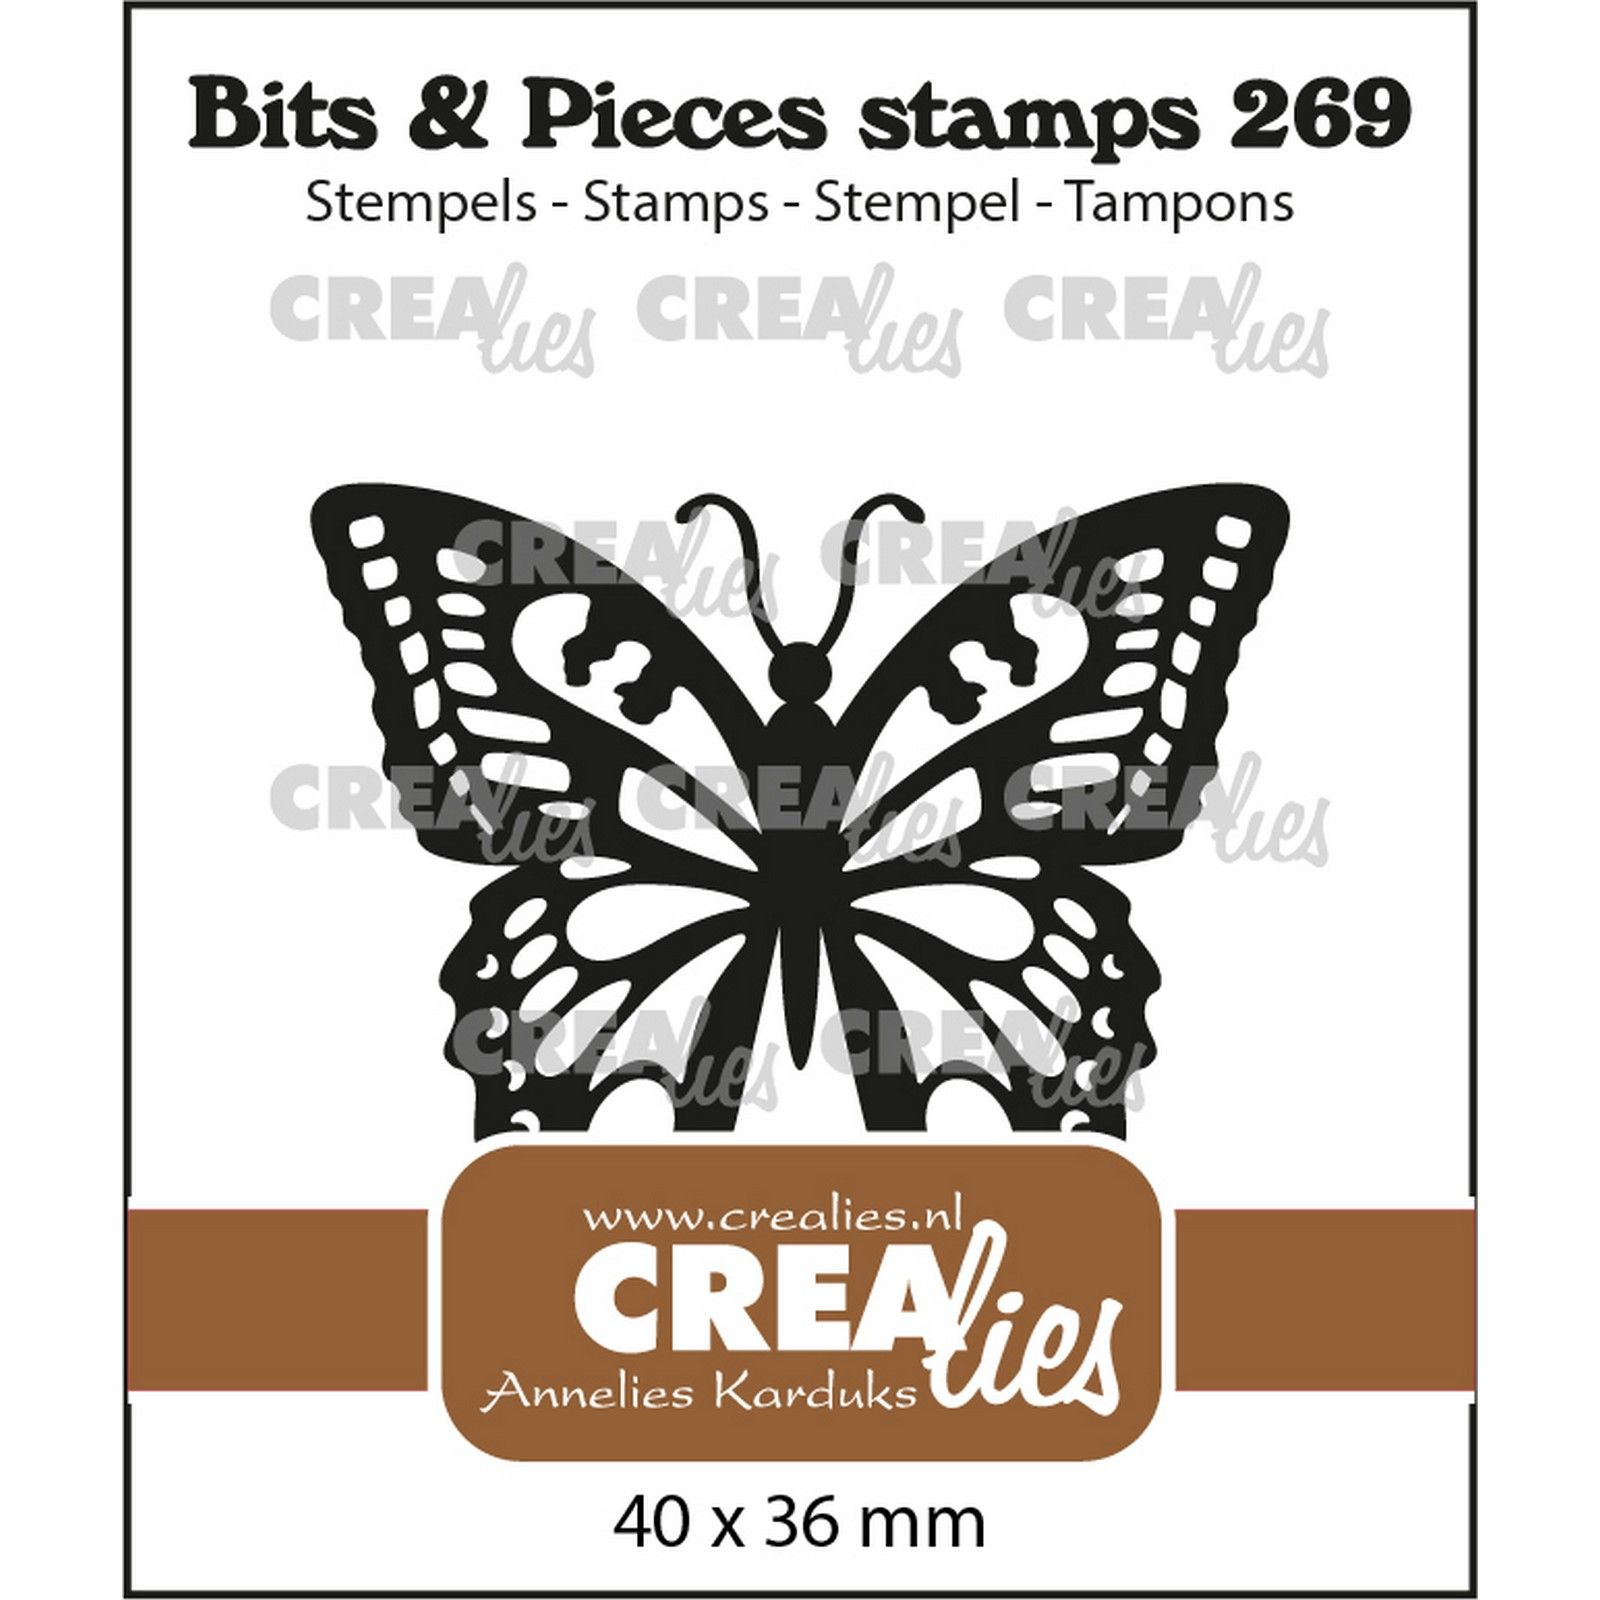 Crealies • Bits & Pieces Stamps Swallowtail Butterfly